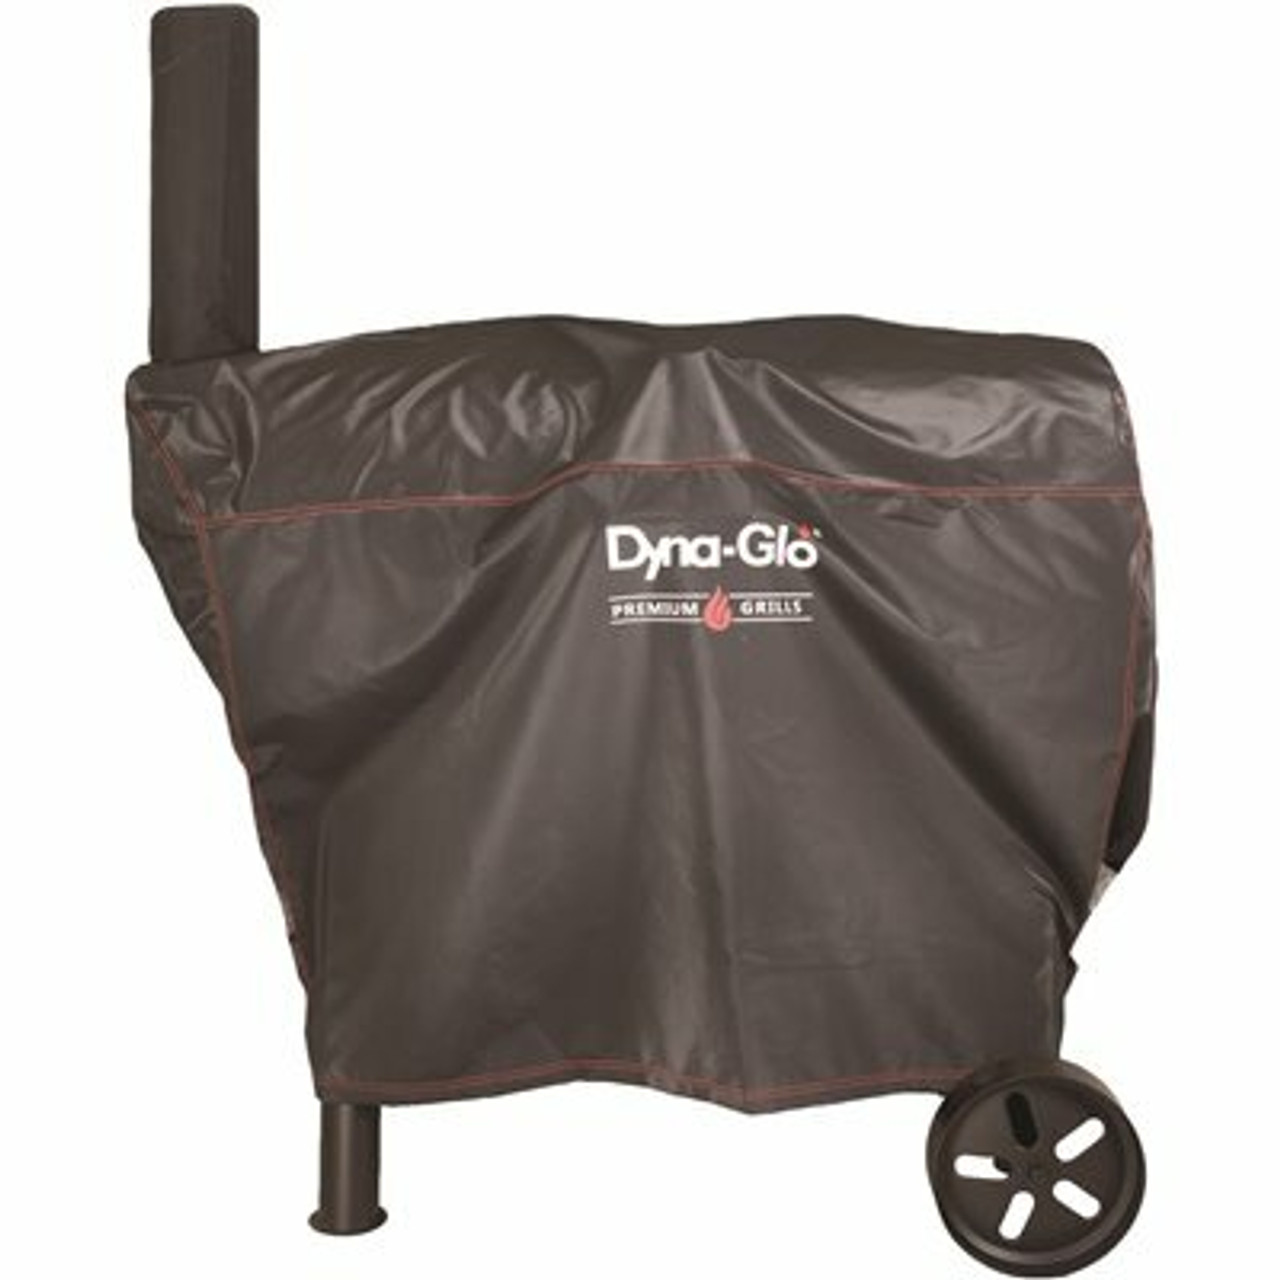 Dyna-Glo 51 In. Barrel Charcoal Grill Cover